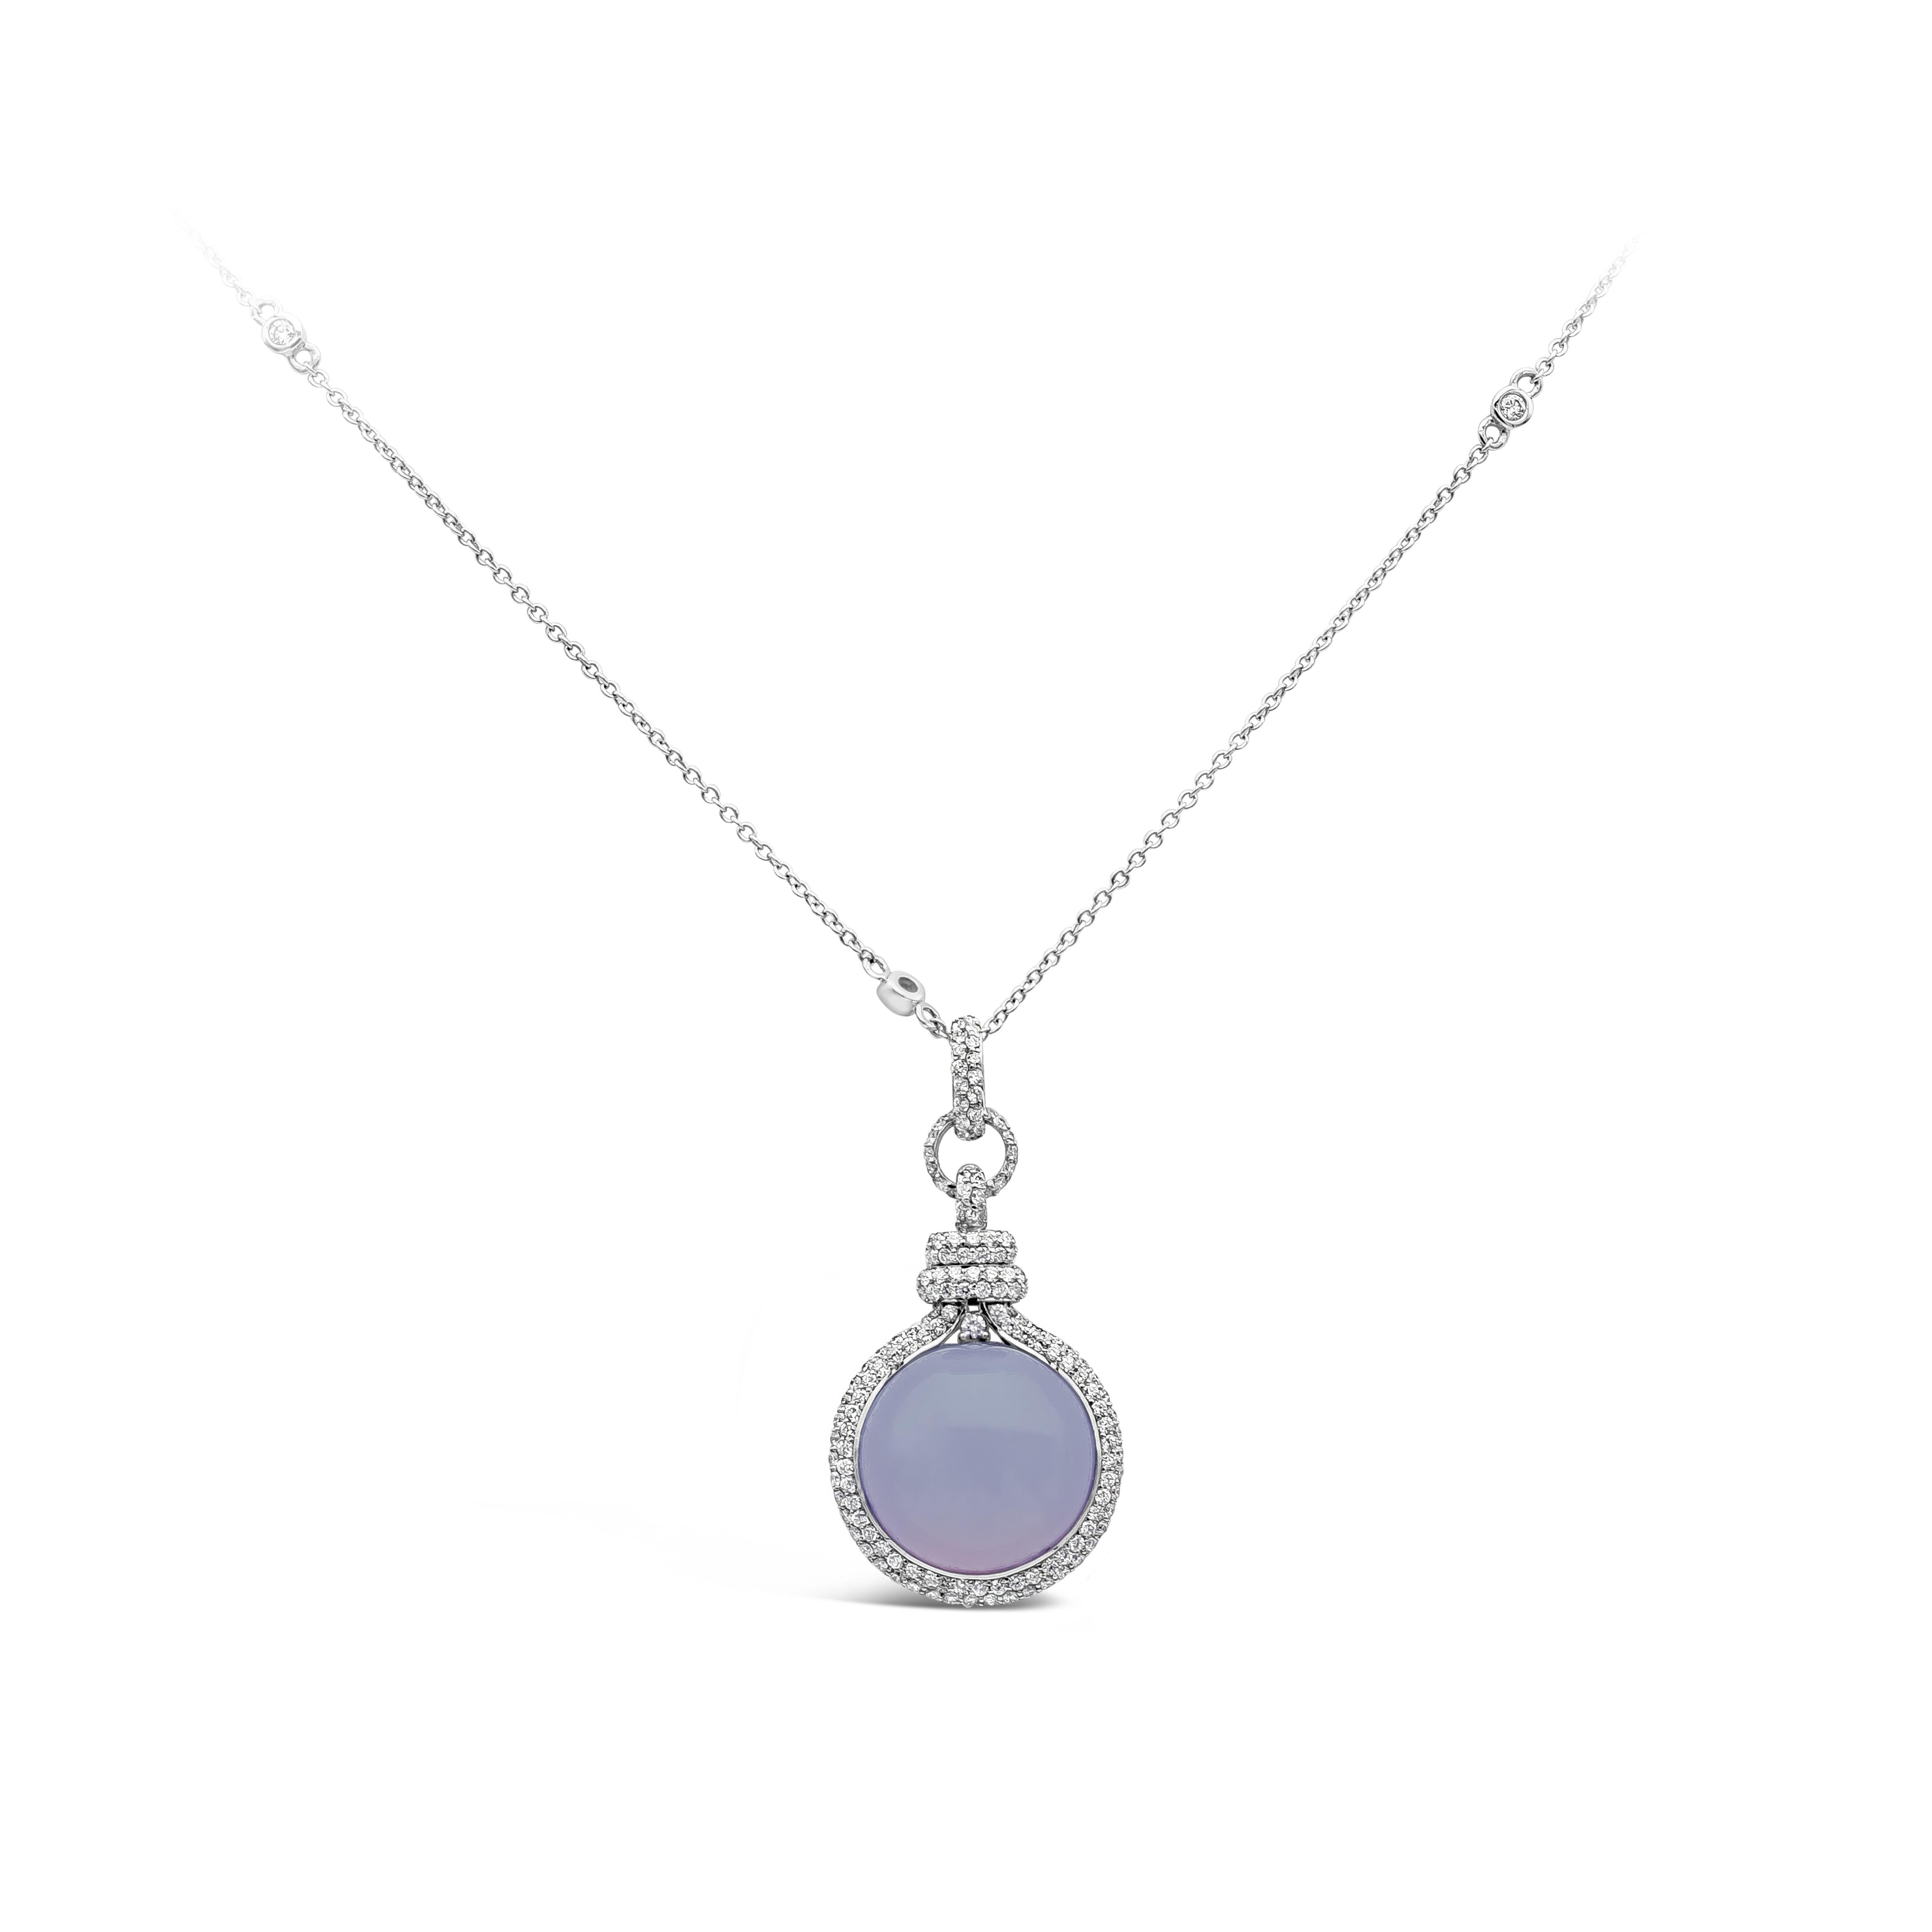 A fashionable pendant necklace showcasing a circular lavender chalcedony weighing 12.09 carat. Center stone is accented with bright round diamonds weighing 1.13 carats total, F-G color and VS clarity. Made in 18K White Gold

Roman Malakov is a